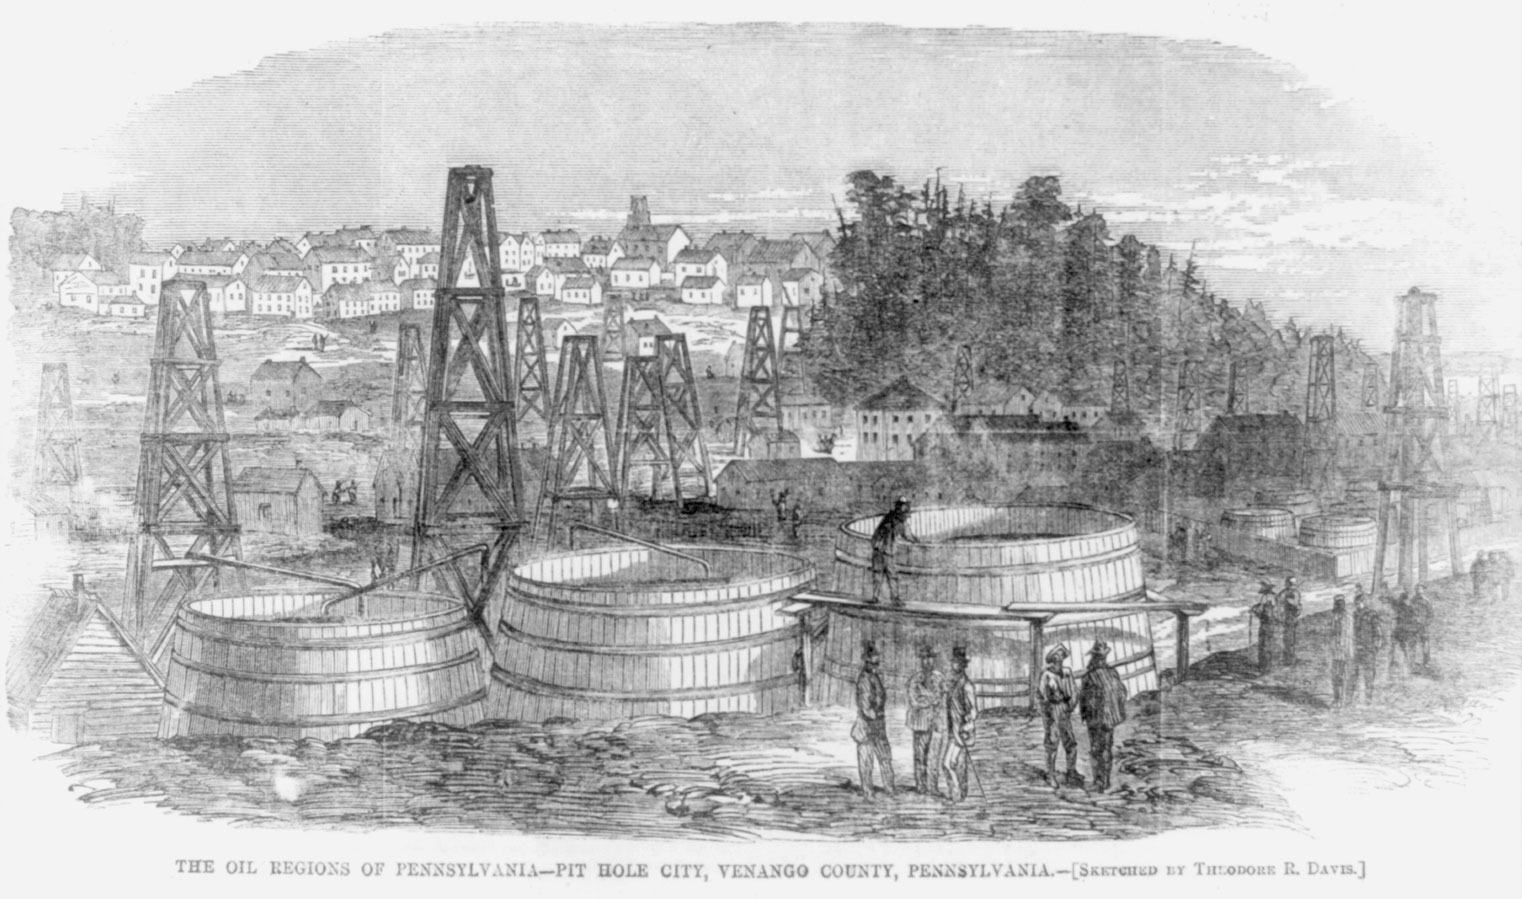 Wood engraving of Pit Hole City, Venango County, Pennsylvania, 1865. The etching shows a town of white buildings clustered in the left background, in front of a tall hill. In the foreground, wooden oil derricks dot the landscape. In the immediate foreground are three large barrels. Men stand in front of and to the side of the right barrel, whereas one man stands on a scaffold with his hand near the barrel's lip.